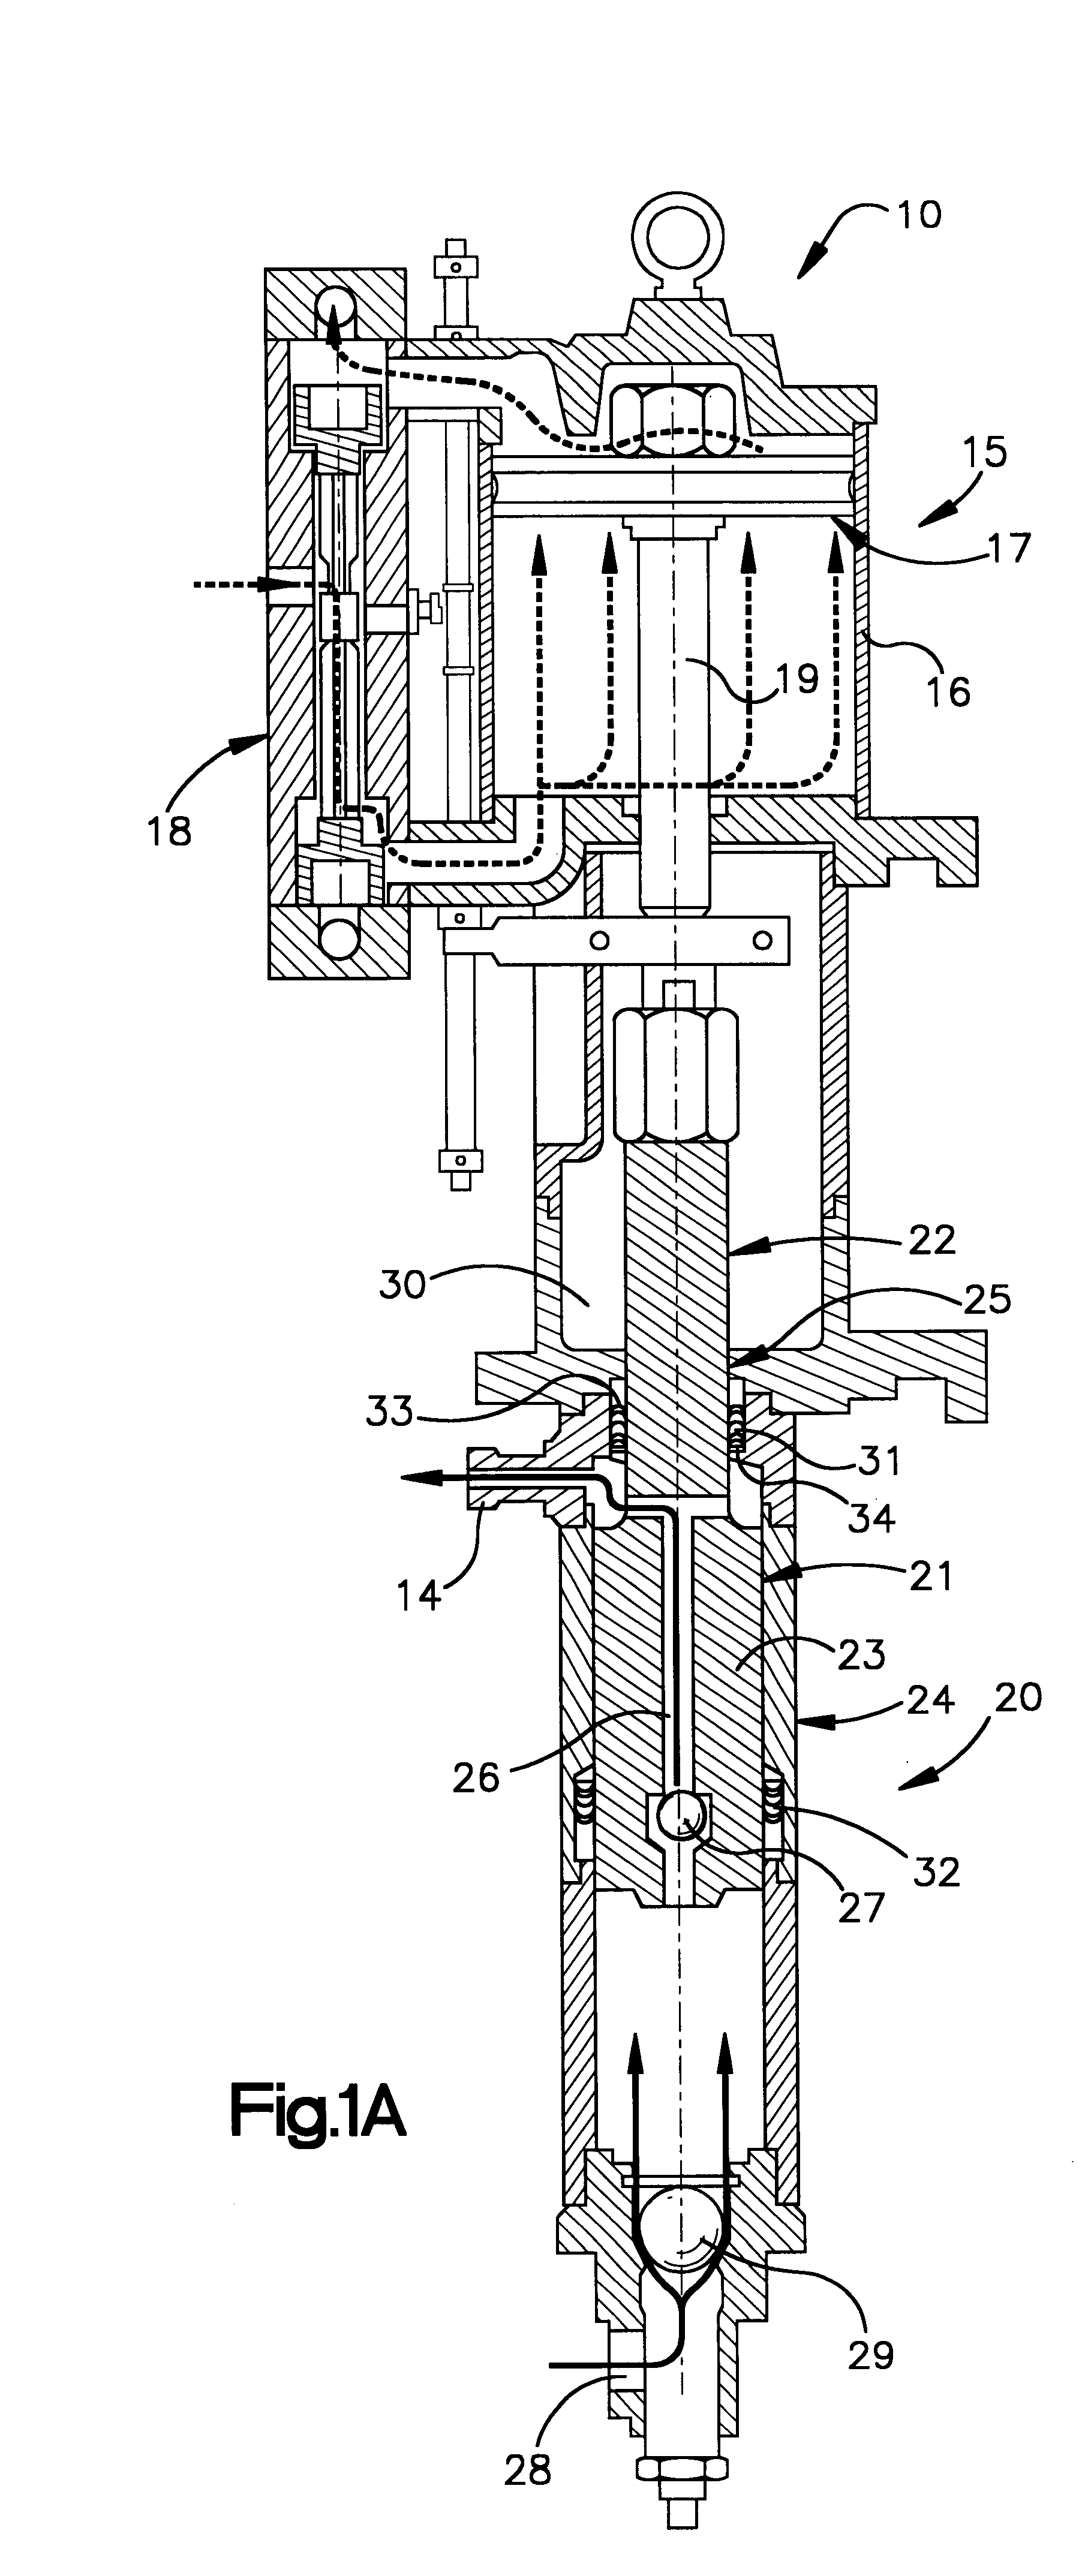 Reciprocating fluid pumps with chromium nitride coated components in contact with non-metallic packing and gasket materials for increased seal life